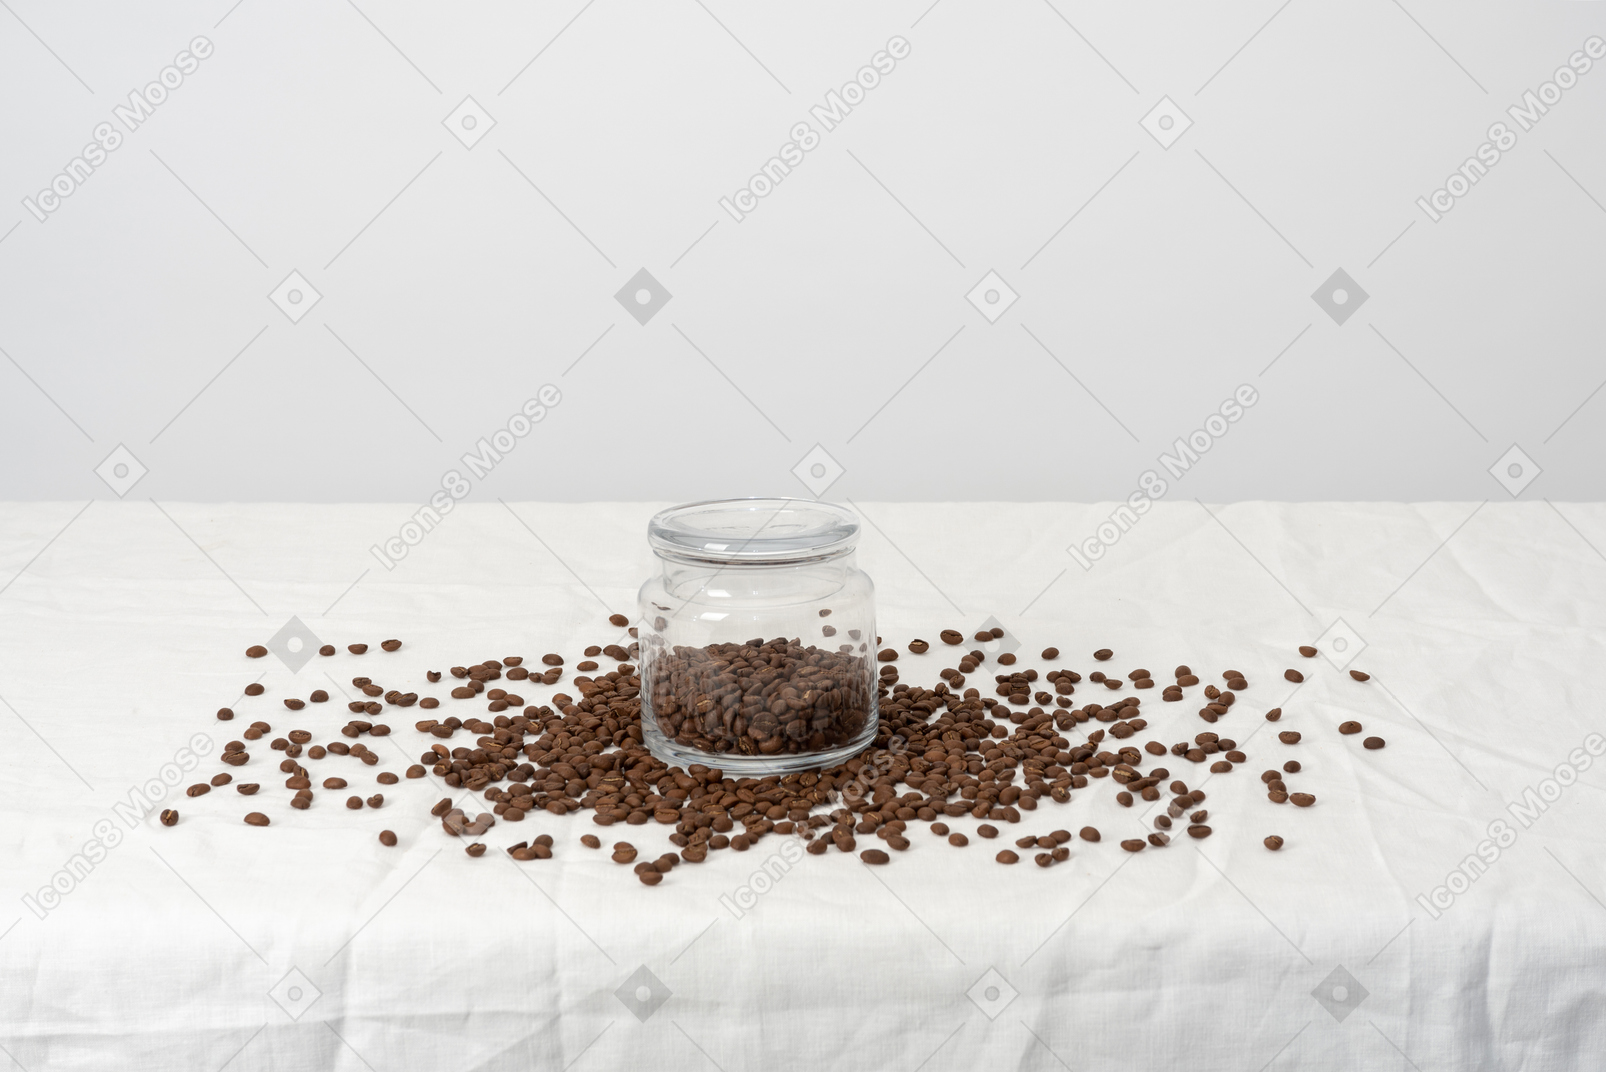 Coffee in the jar on the table